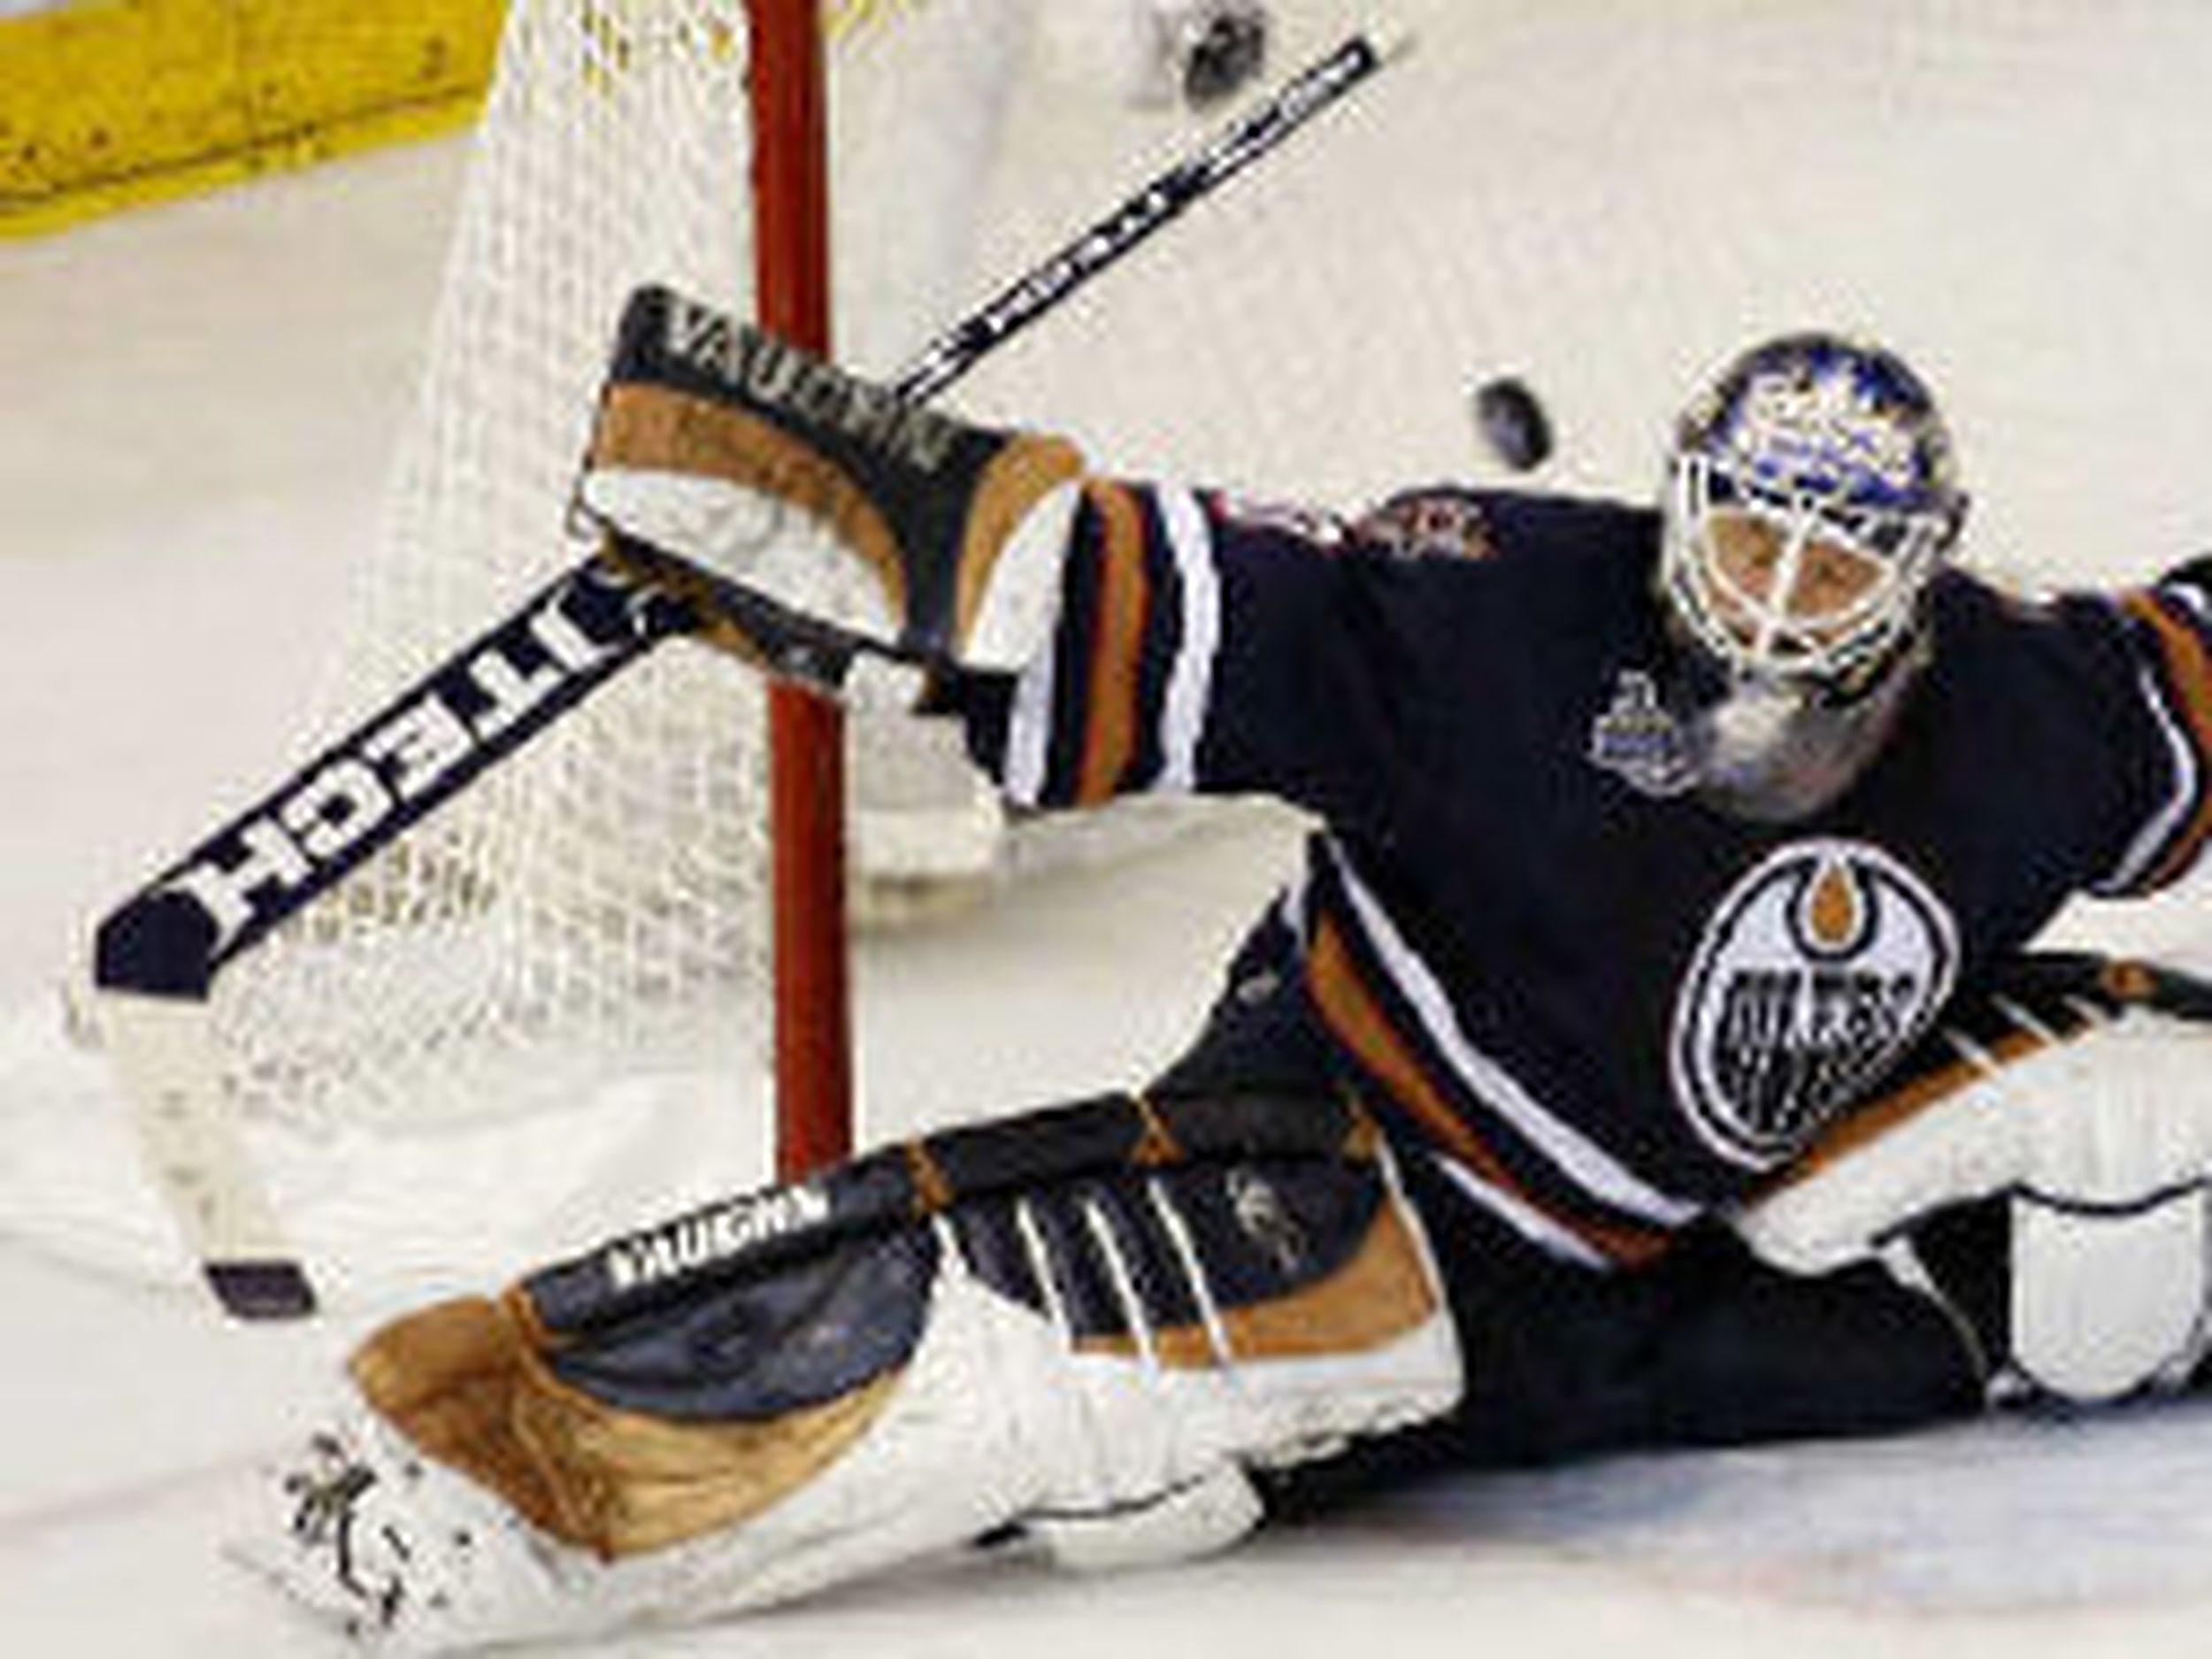 Is the Oilers' goaltending good enough to challenge for Stanley Cup?